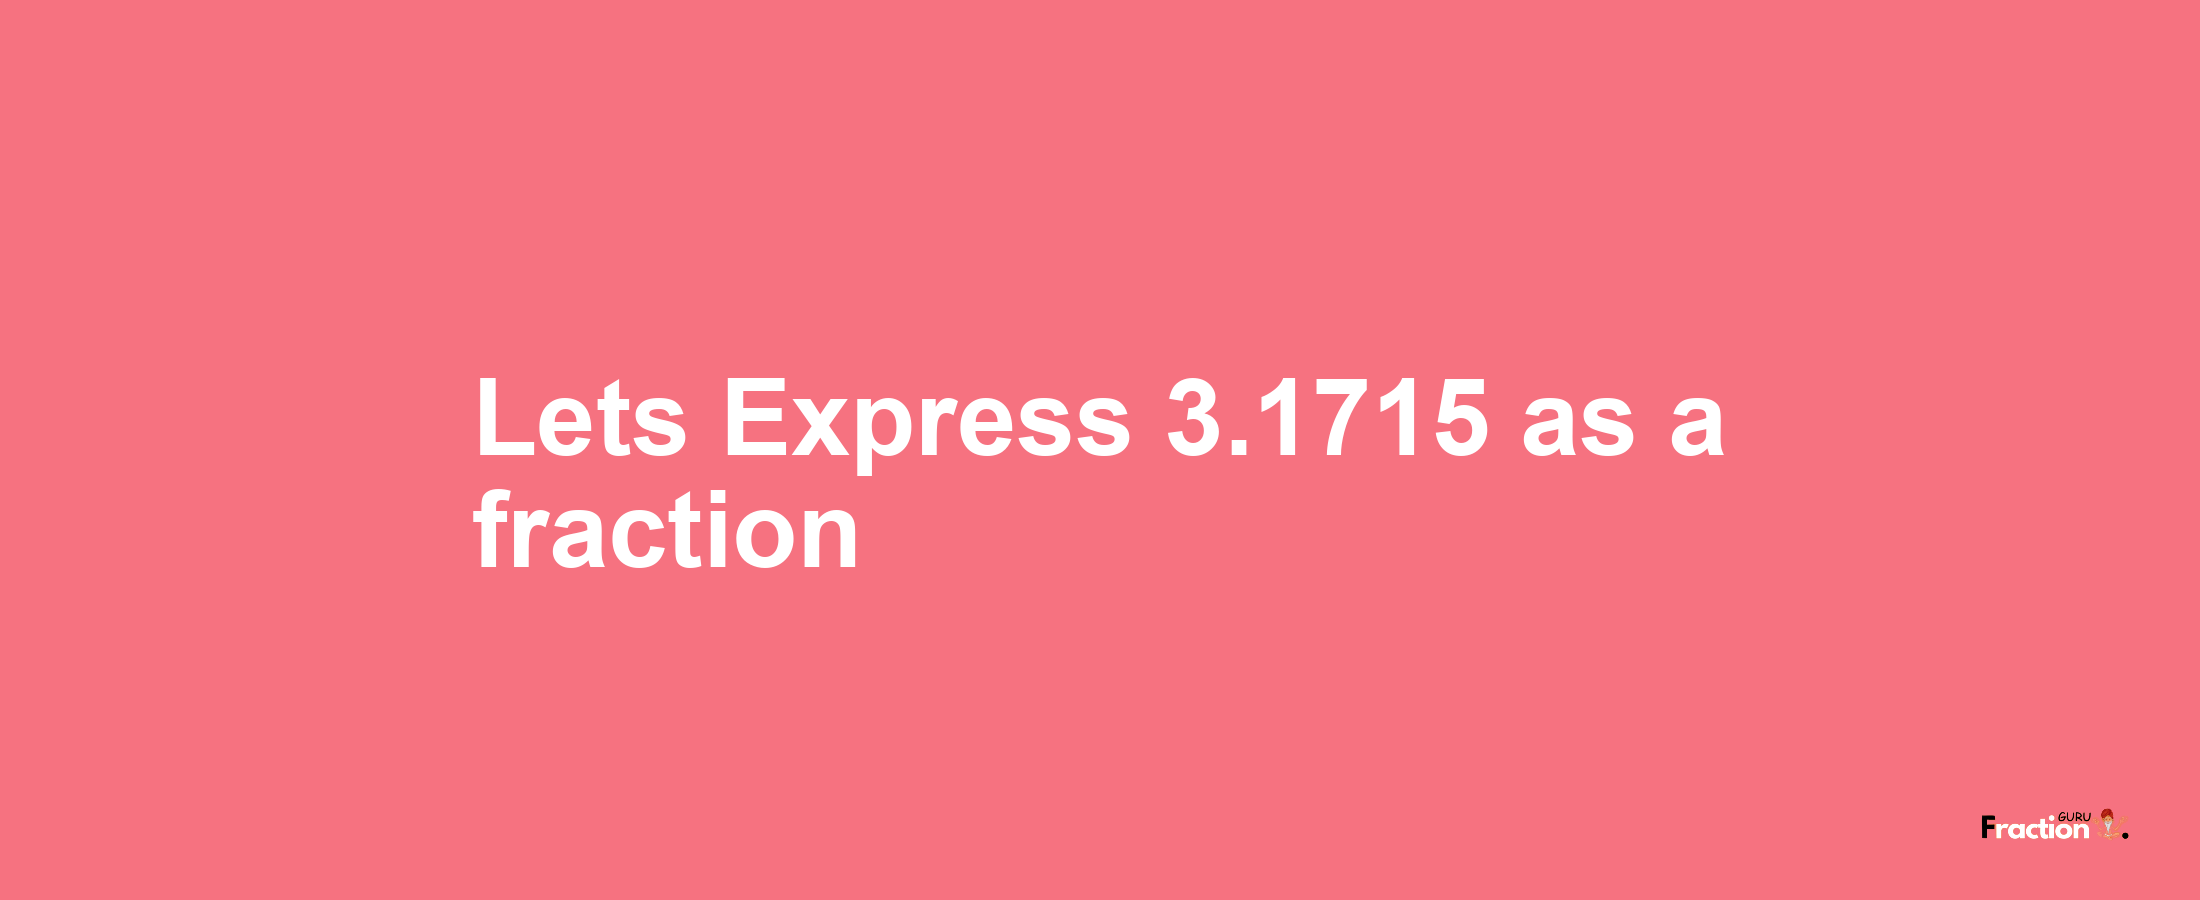 Lets Express 3.1715 as afraction